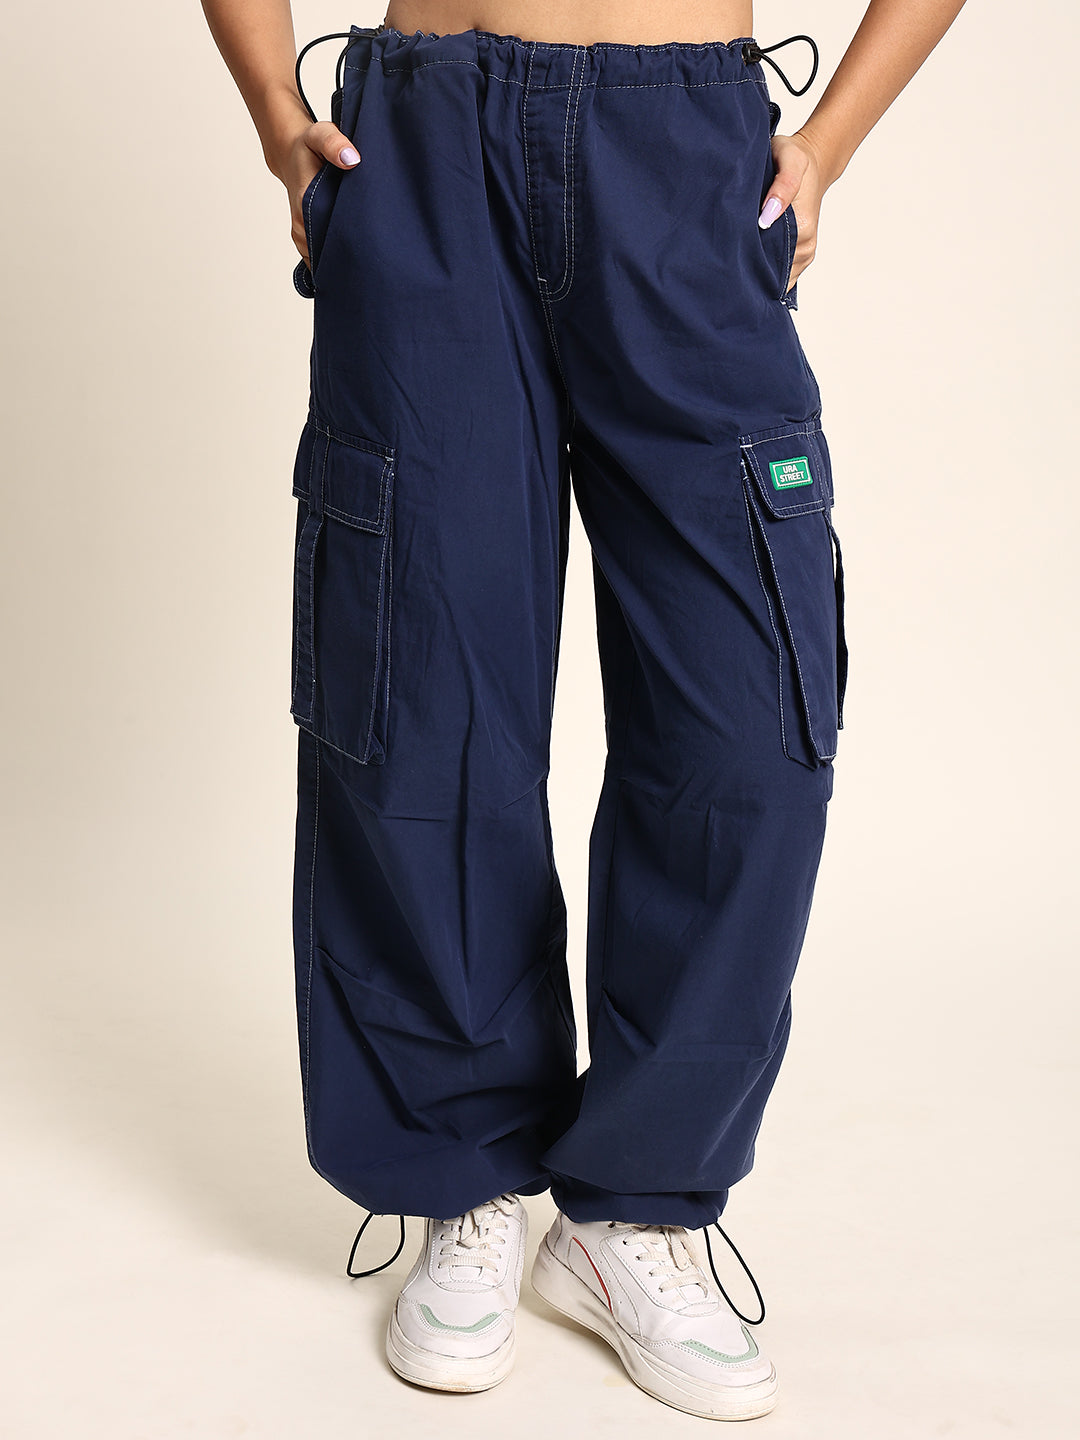 Women Blue Parachute Fit Pull On Cargo Pants